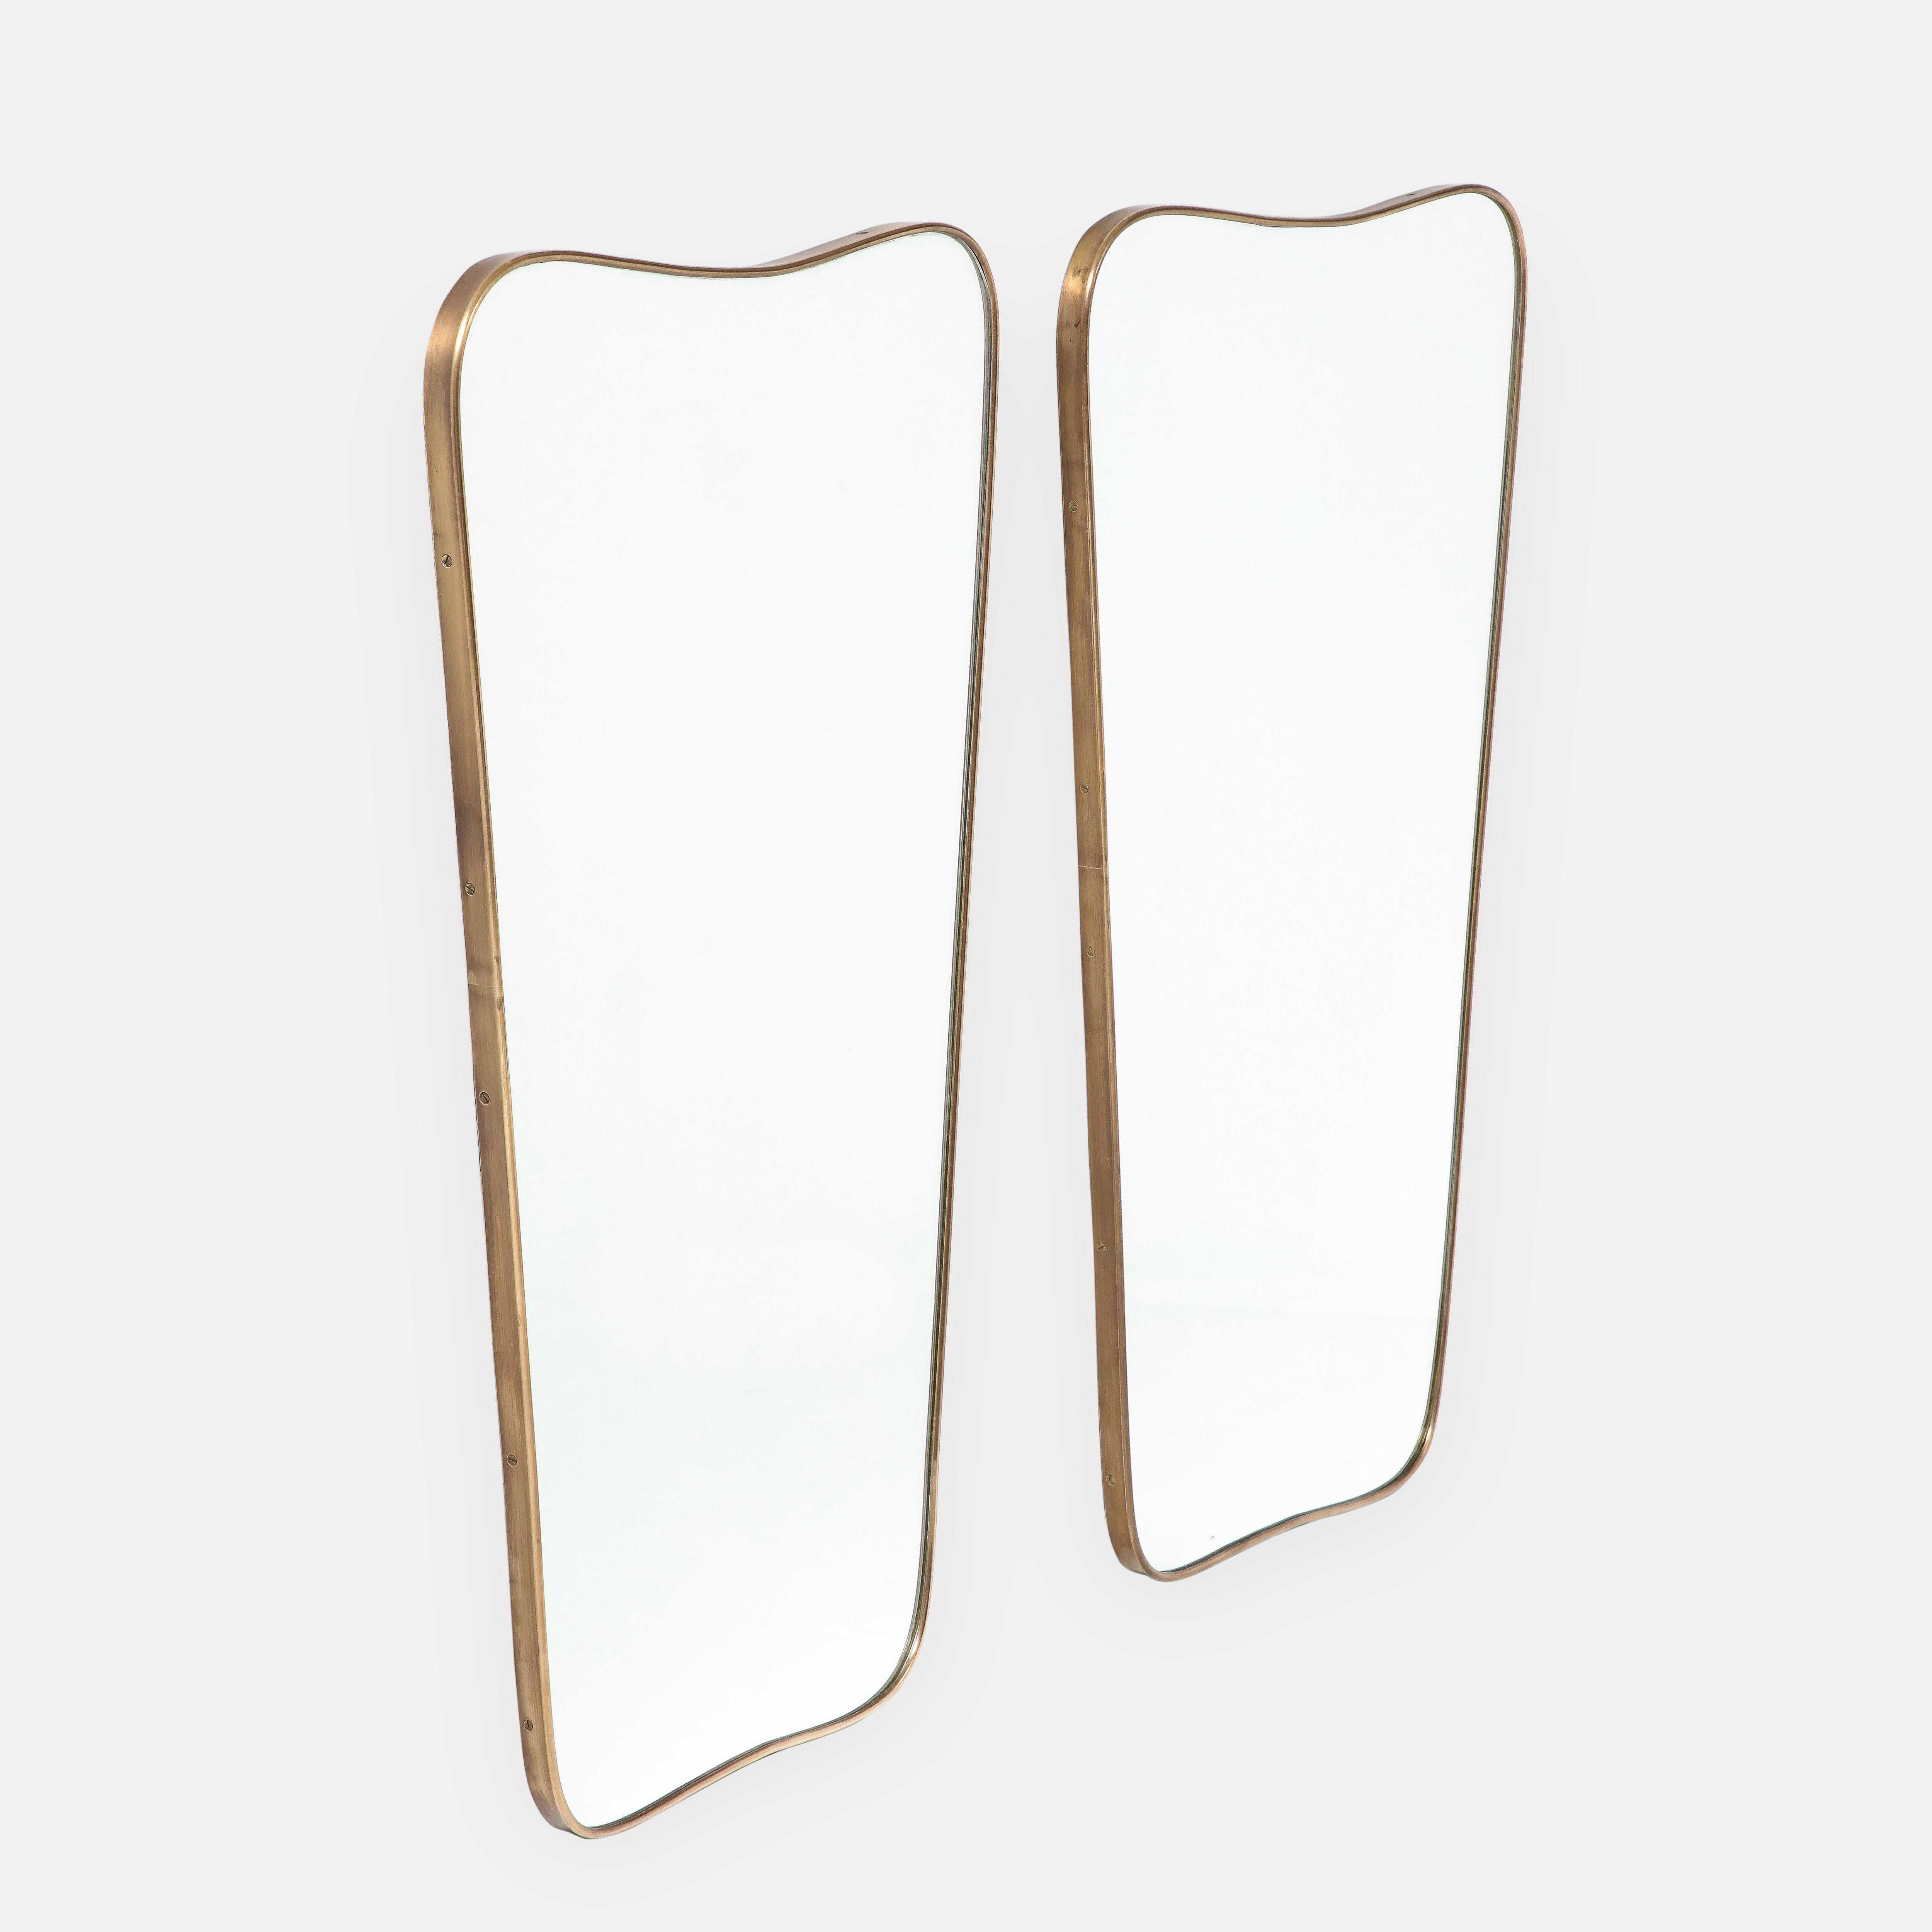 1950s Italian modernist pair of large wall mirrors consisting of shaped brass frames with gently arched tops and rounded corners which taper towards the slightly arched bottoms. These chic pair of mirrors are truly an iconic Italian midcentury brass